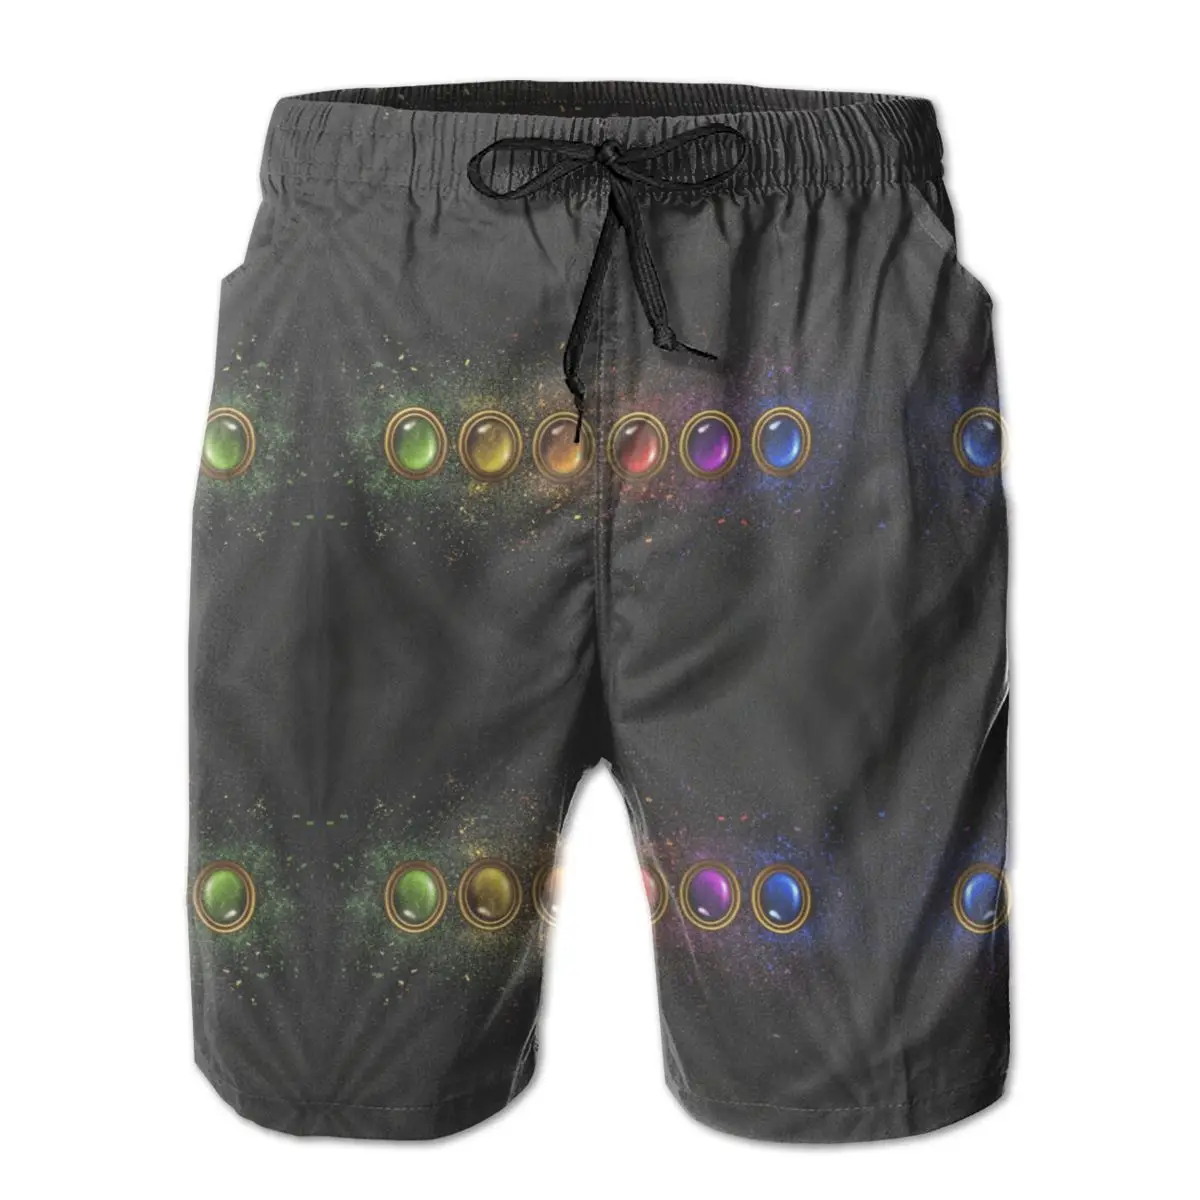 

Hawaii Pants Causal R92 Breathable Quick Dry Funny Noveltyrunning I Have Infinity Six Gems